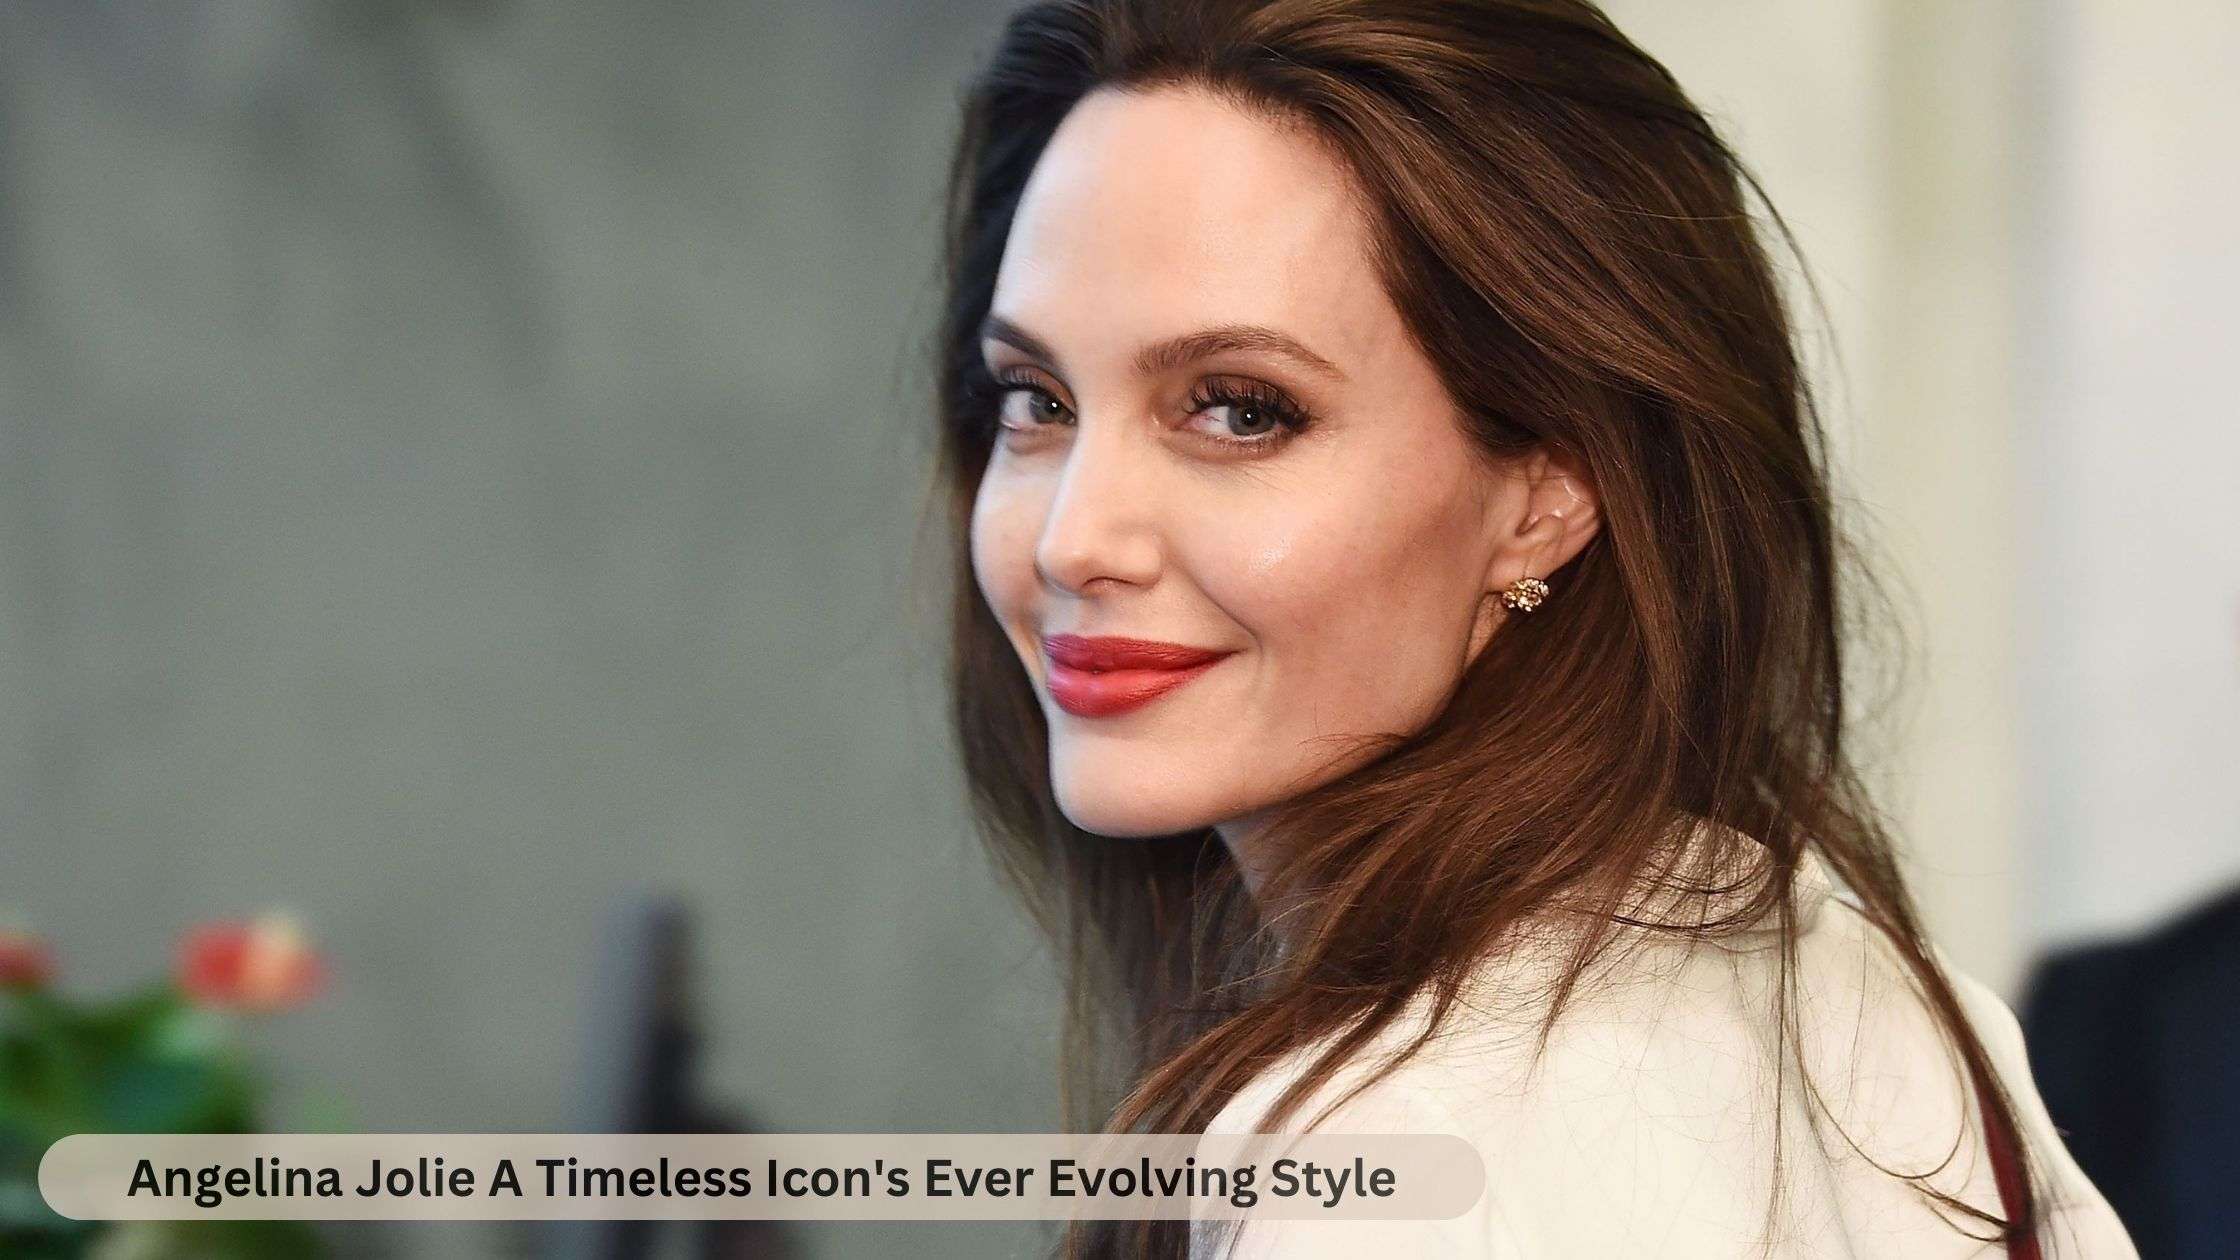 Angelina Jolie A Timeless Icon Ever